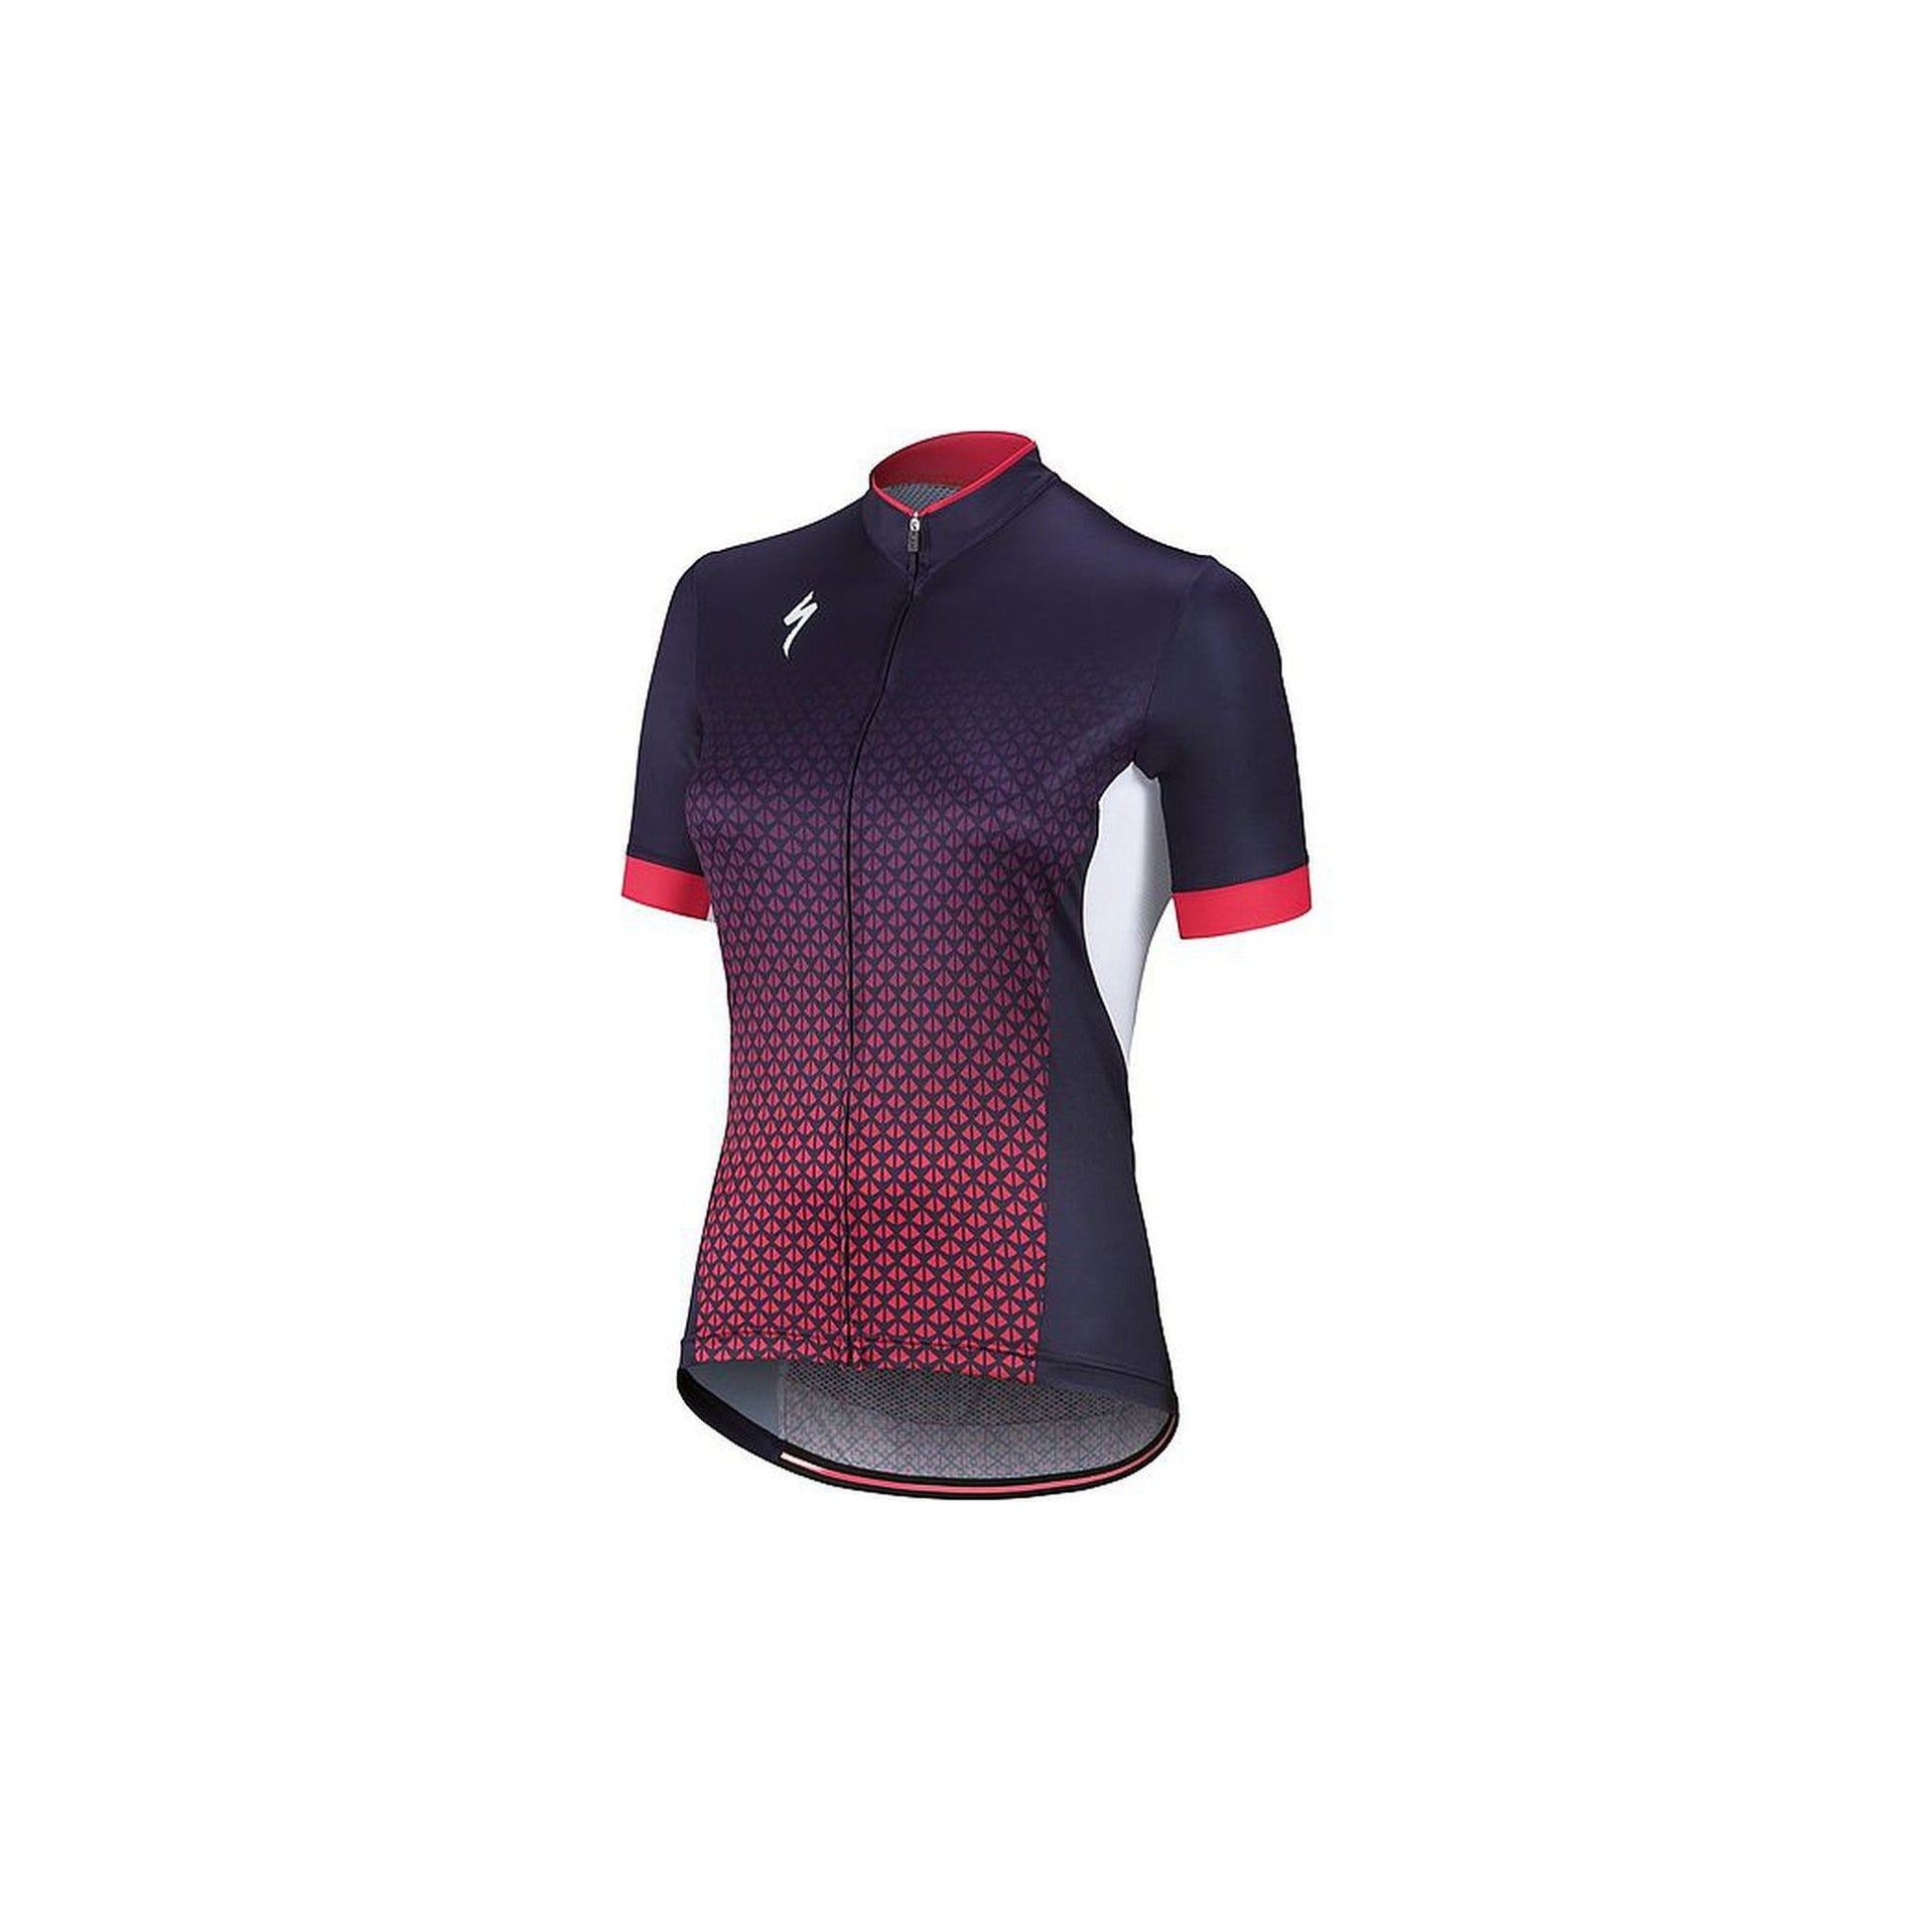 SL Elite SS Women's Jersey-Cycles Direct Specialized